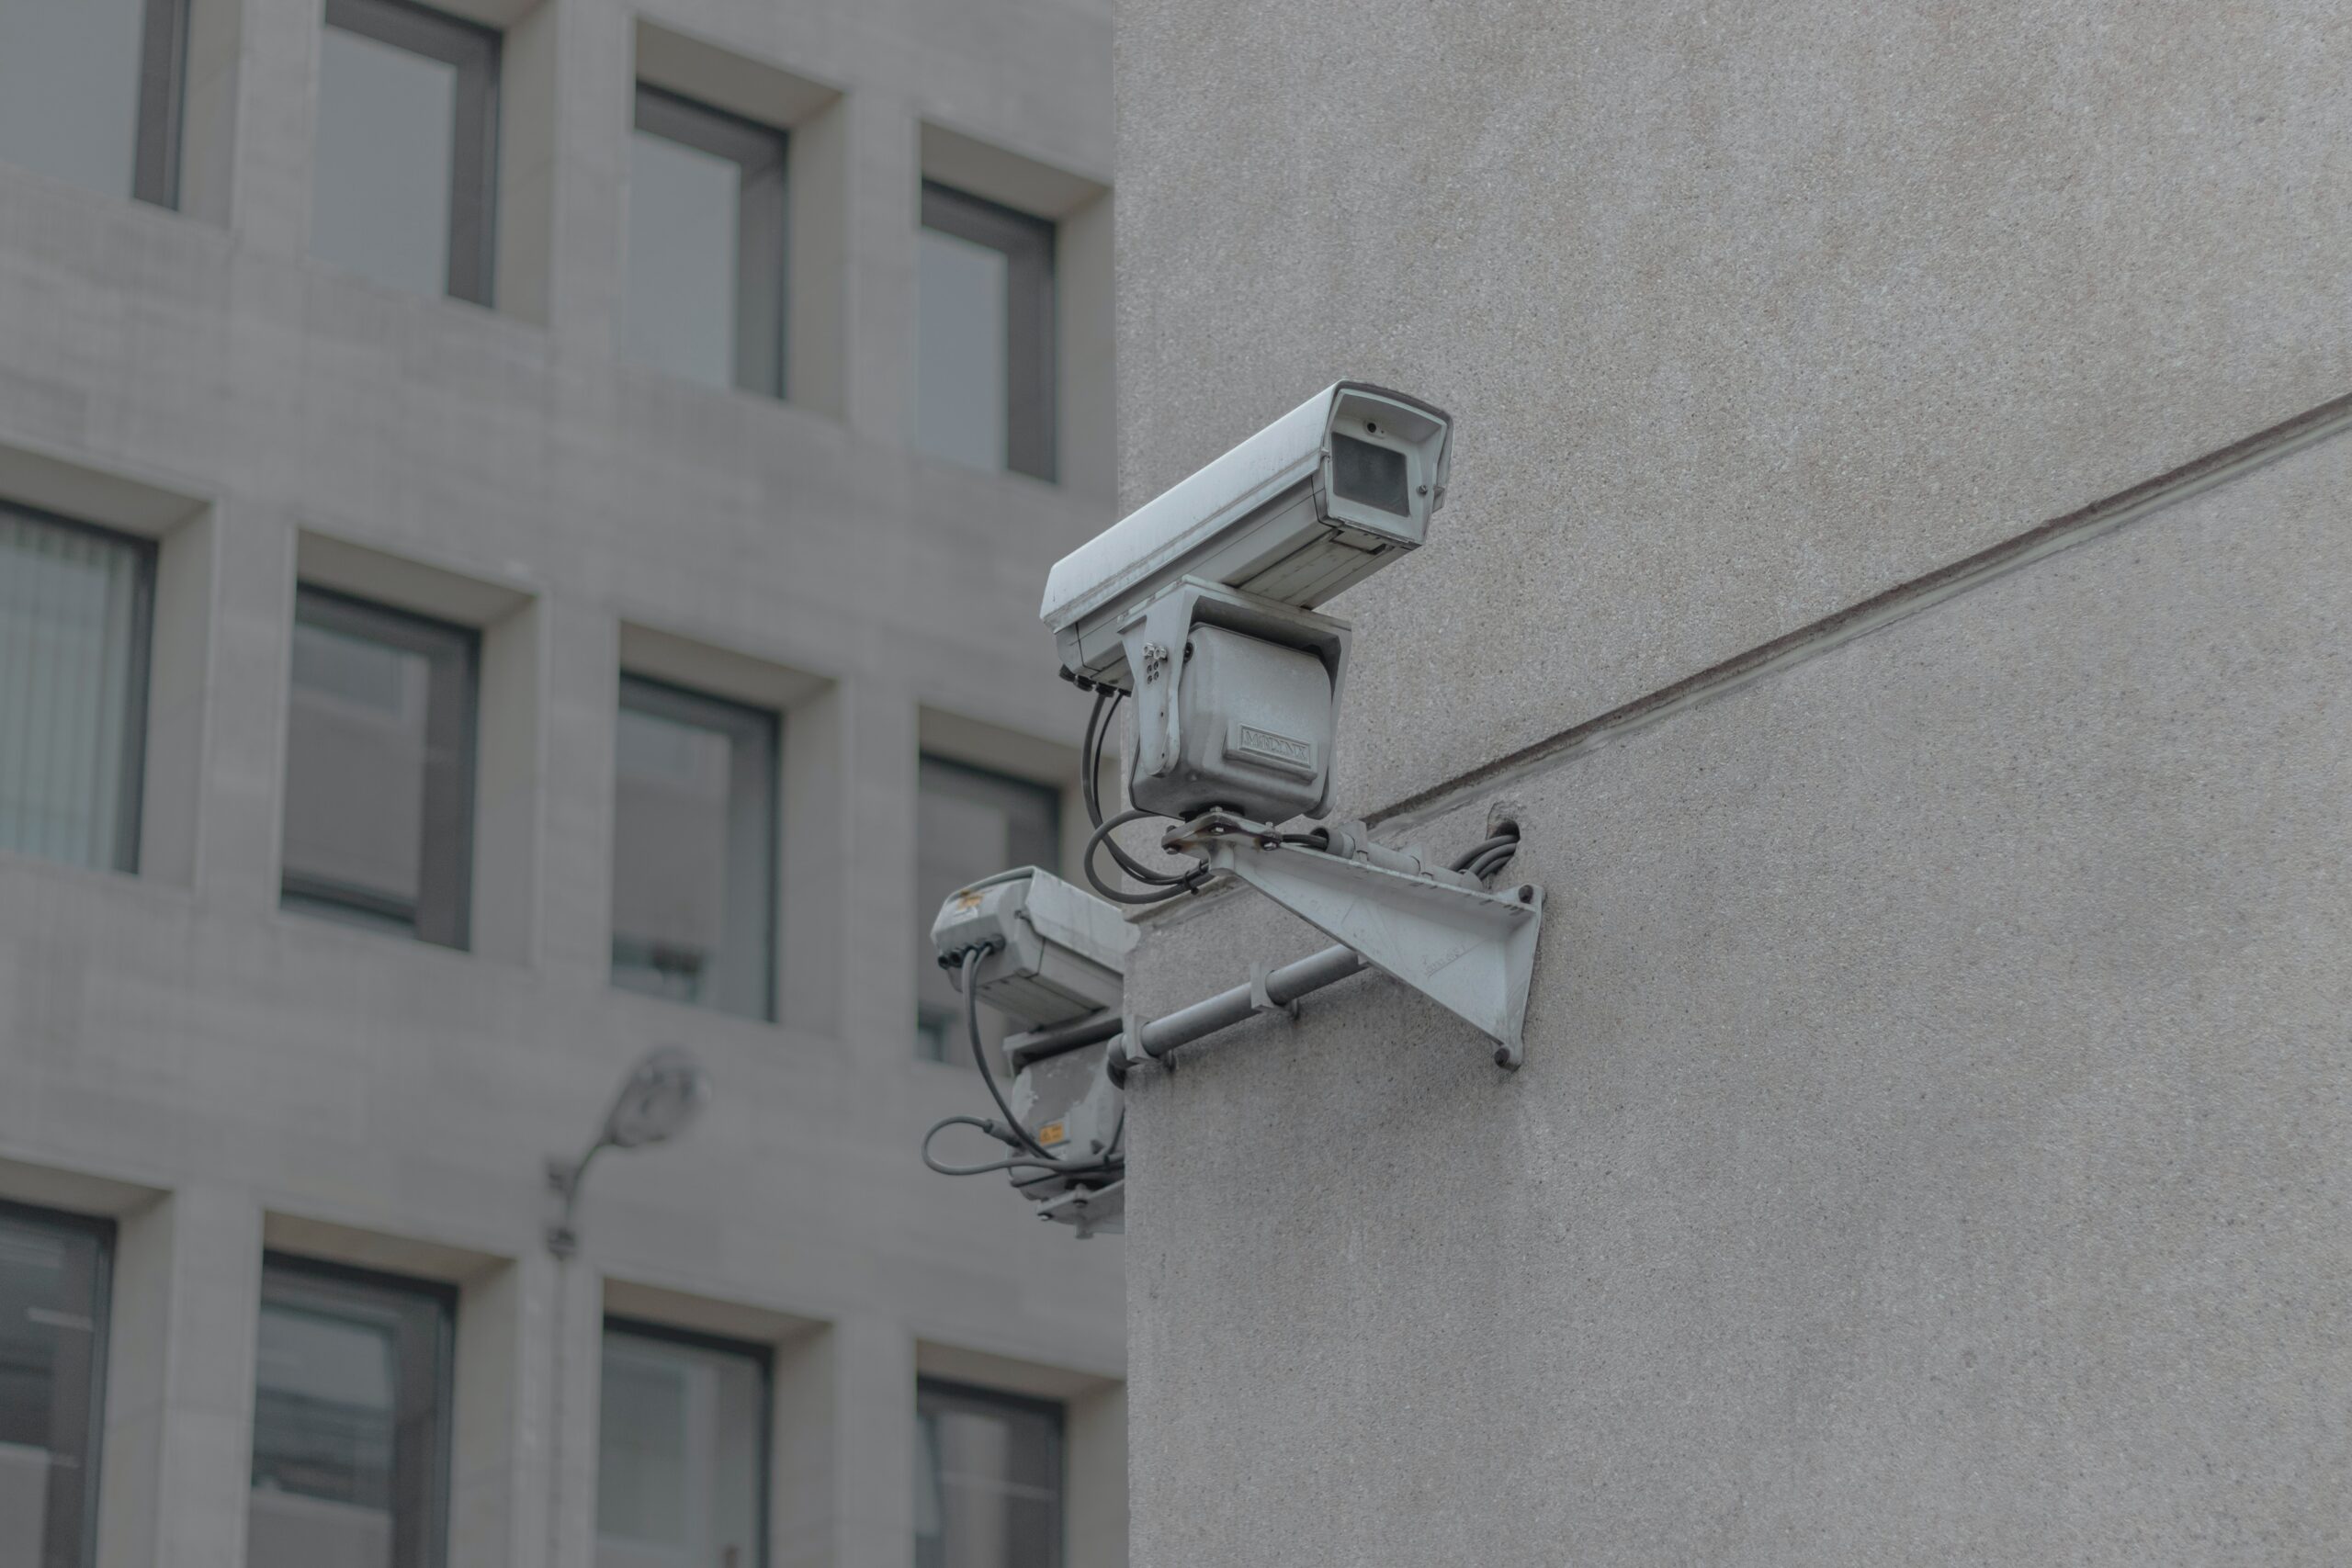 What to consider when installing security cameras